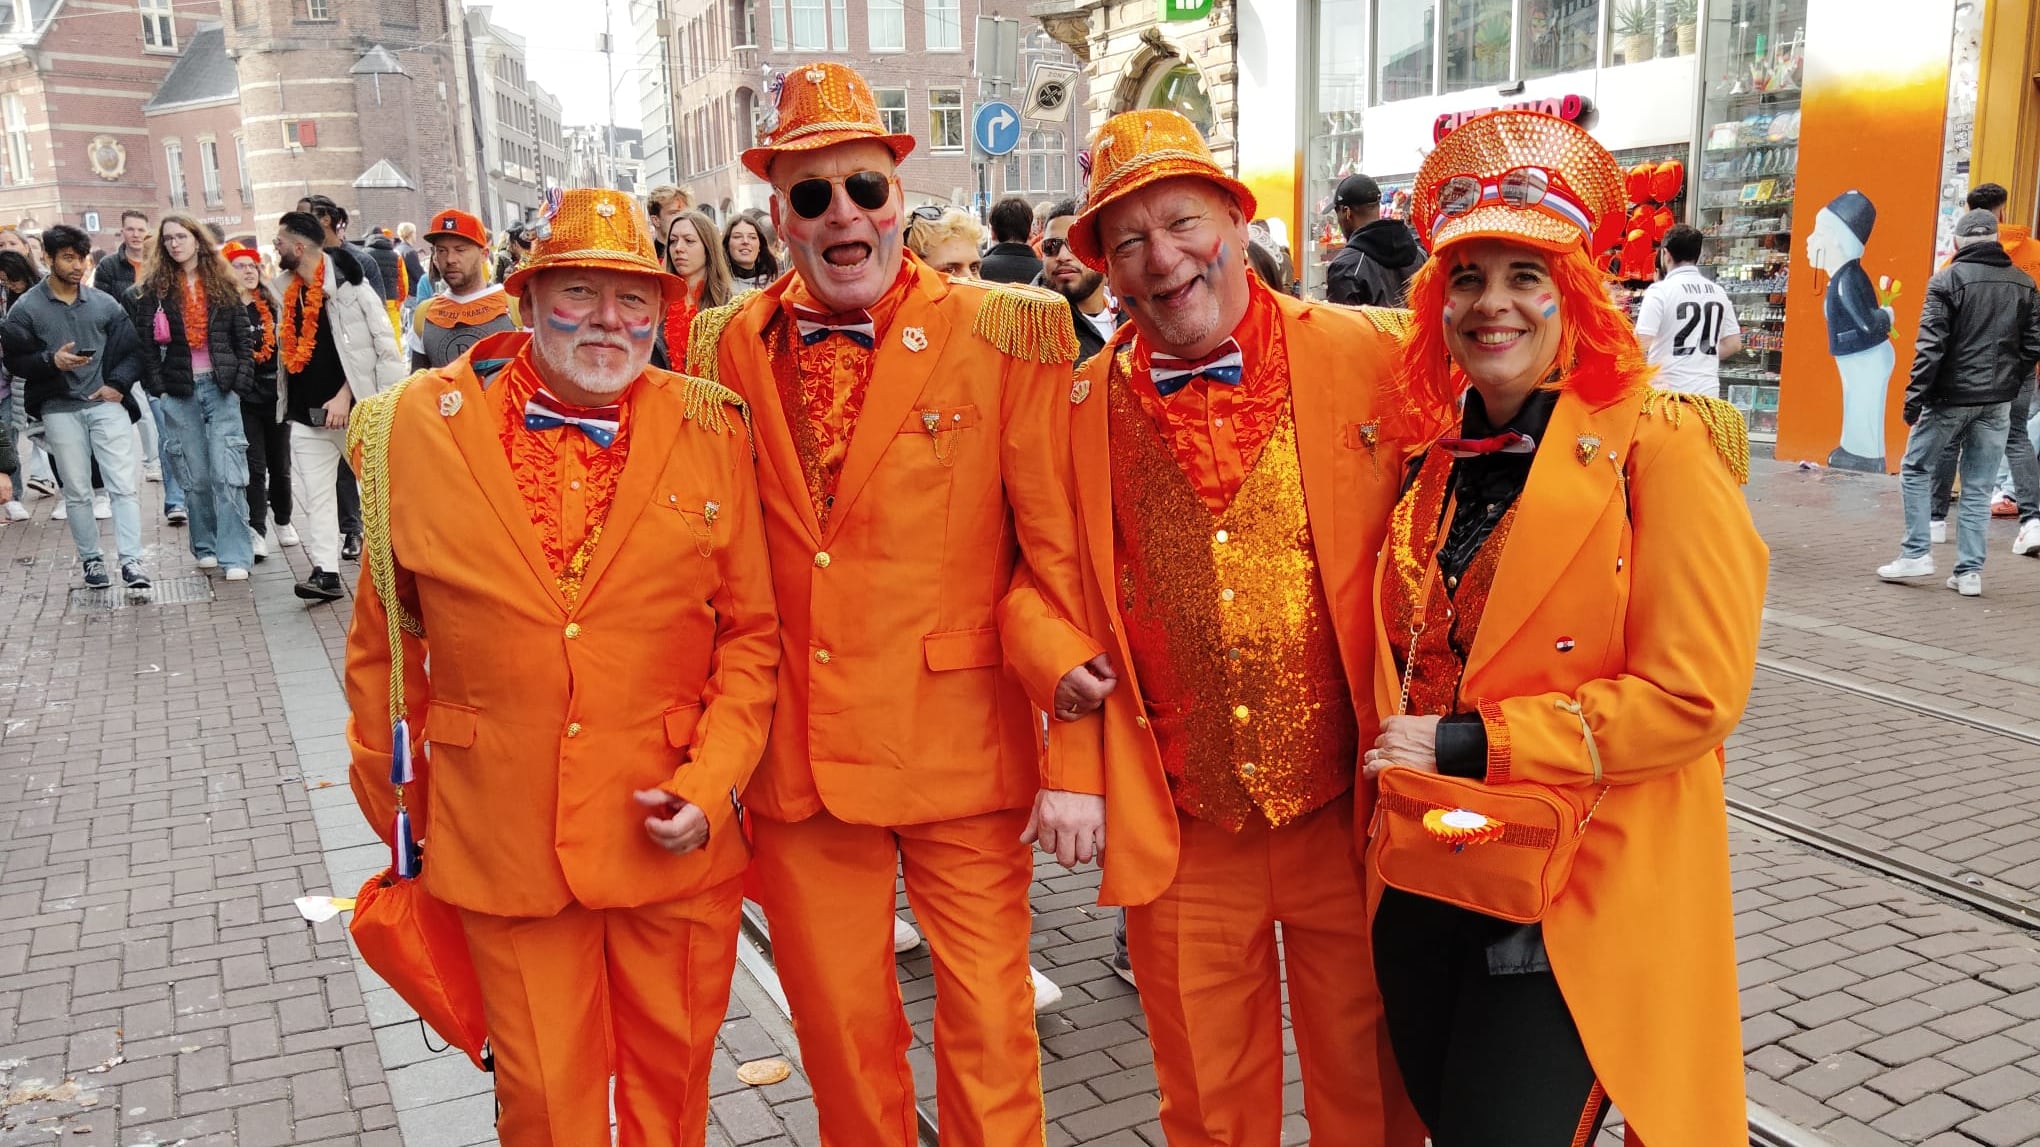 Revellers in Amsterdam decked out in Orange as part of the annual King's Day celebrations. PICTURE: PEDRO DONALD